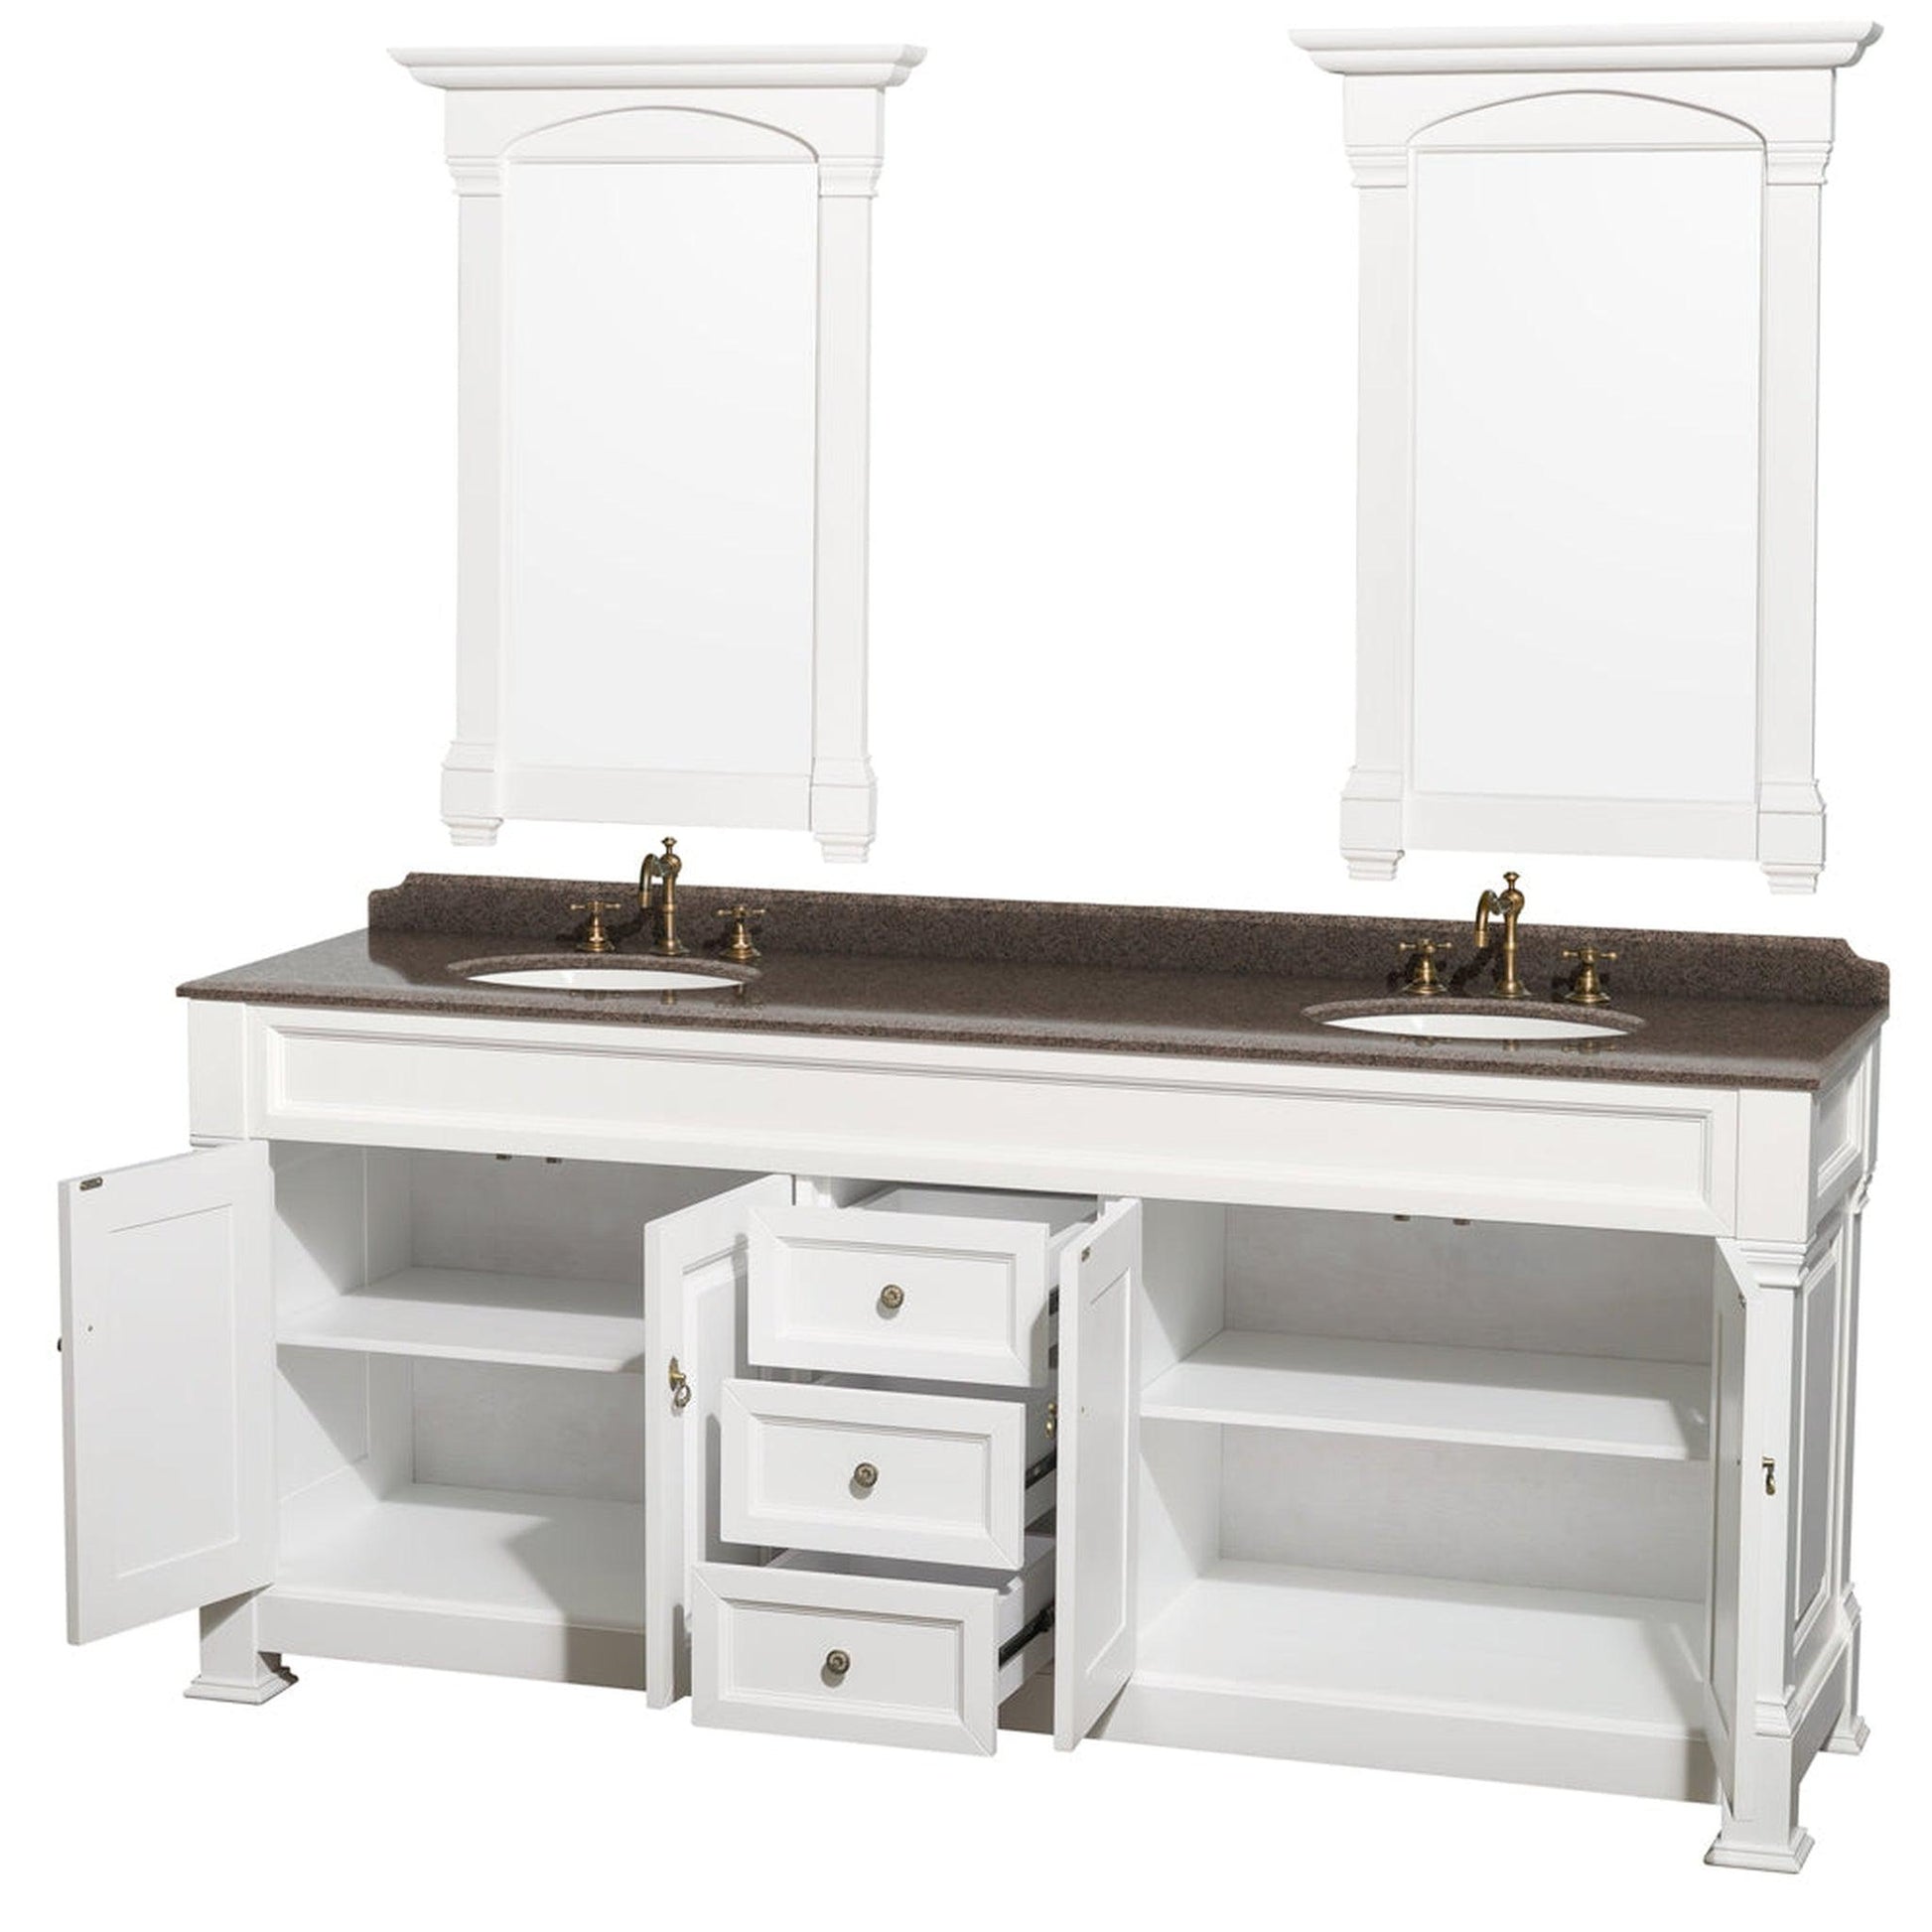 Wyndham Collection Andover 80" Double Bathroom Vanity in White With Imperial Brown Granite Countertop, Undermount Oval Sink & 28" Mirror